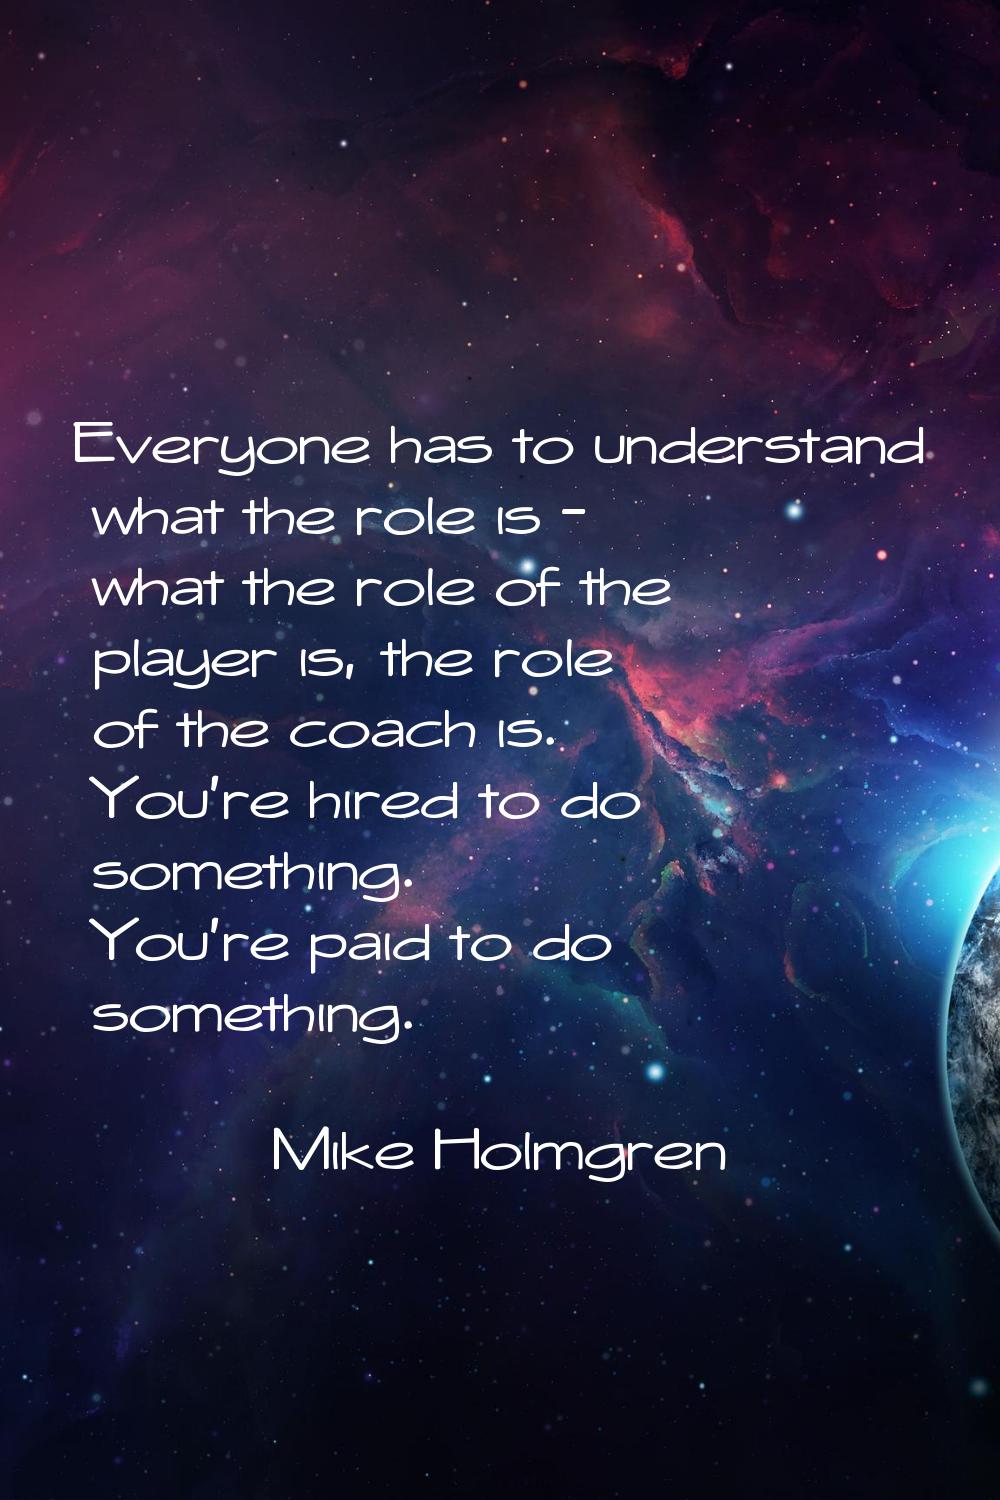 Everyone has to understand what the role is - what the role of the player is, the role of the coach